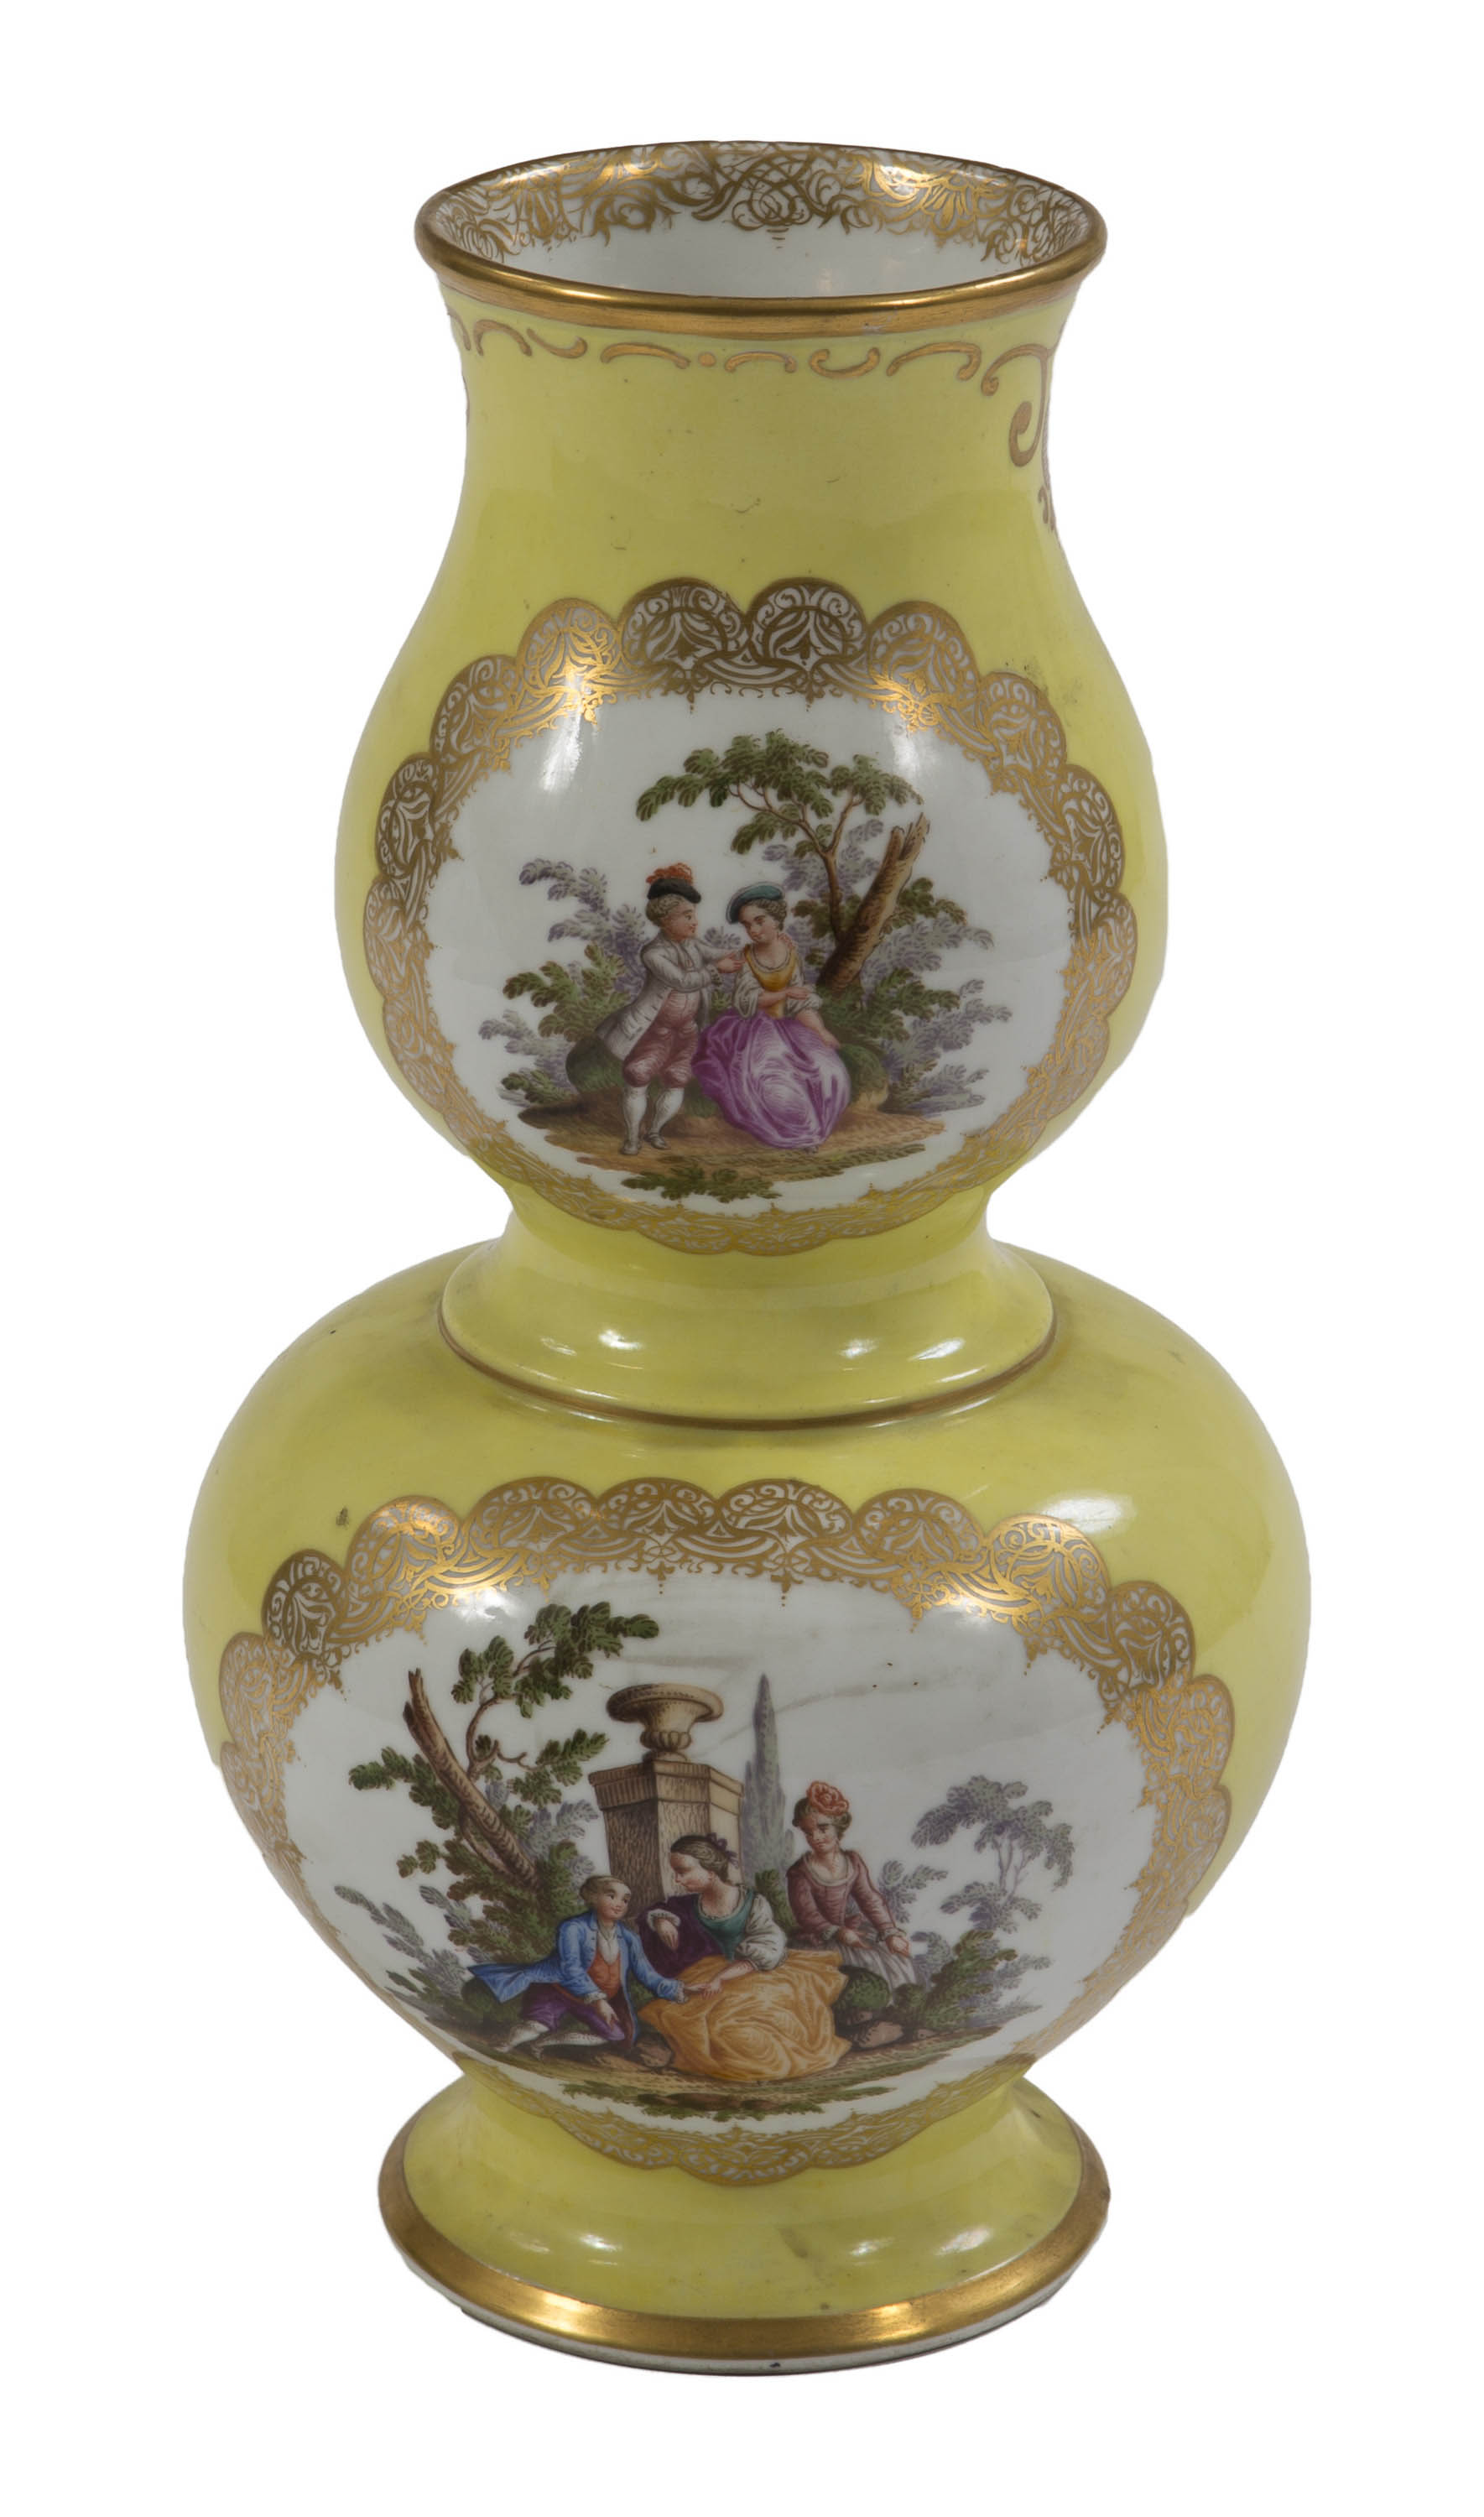 A DREDSEN DOUBLE-GOURD YELLOW GROUND PORCELAIN VASE, 19th century, with AR monogram, with four